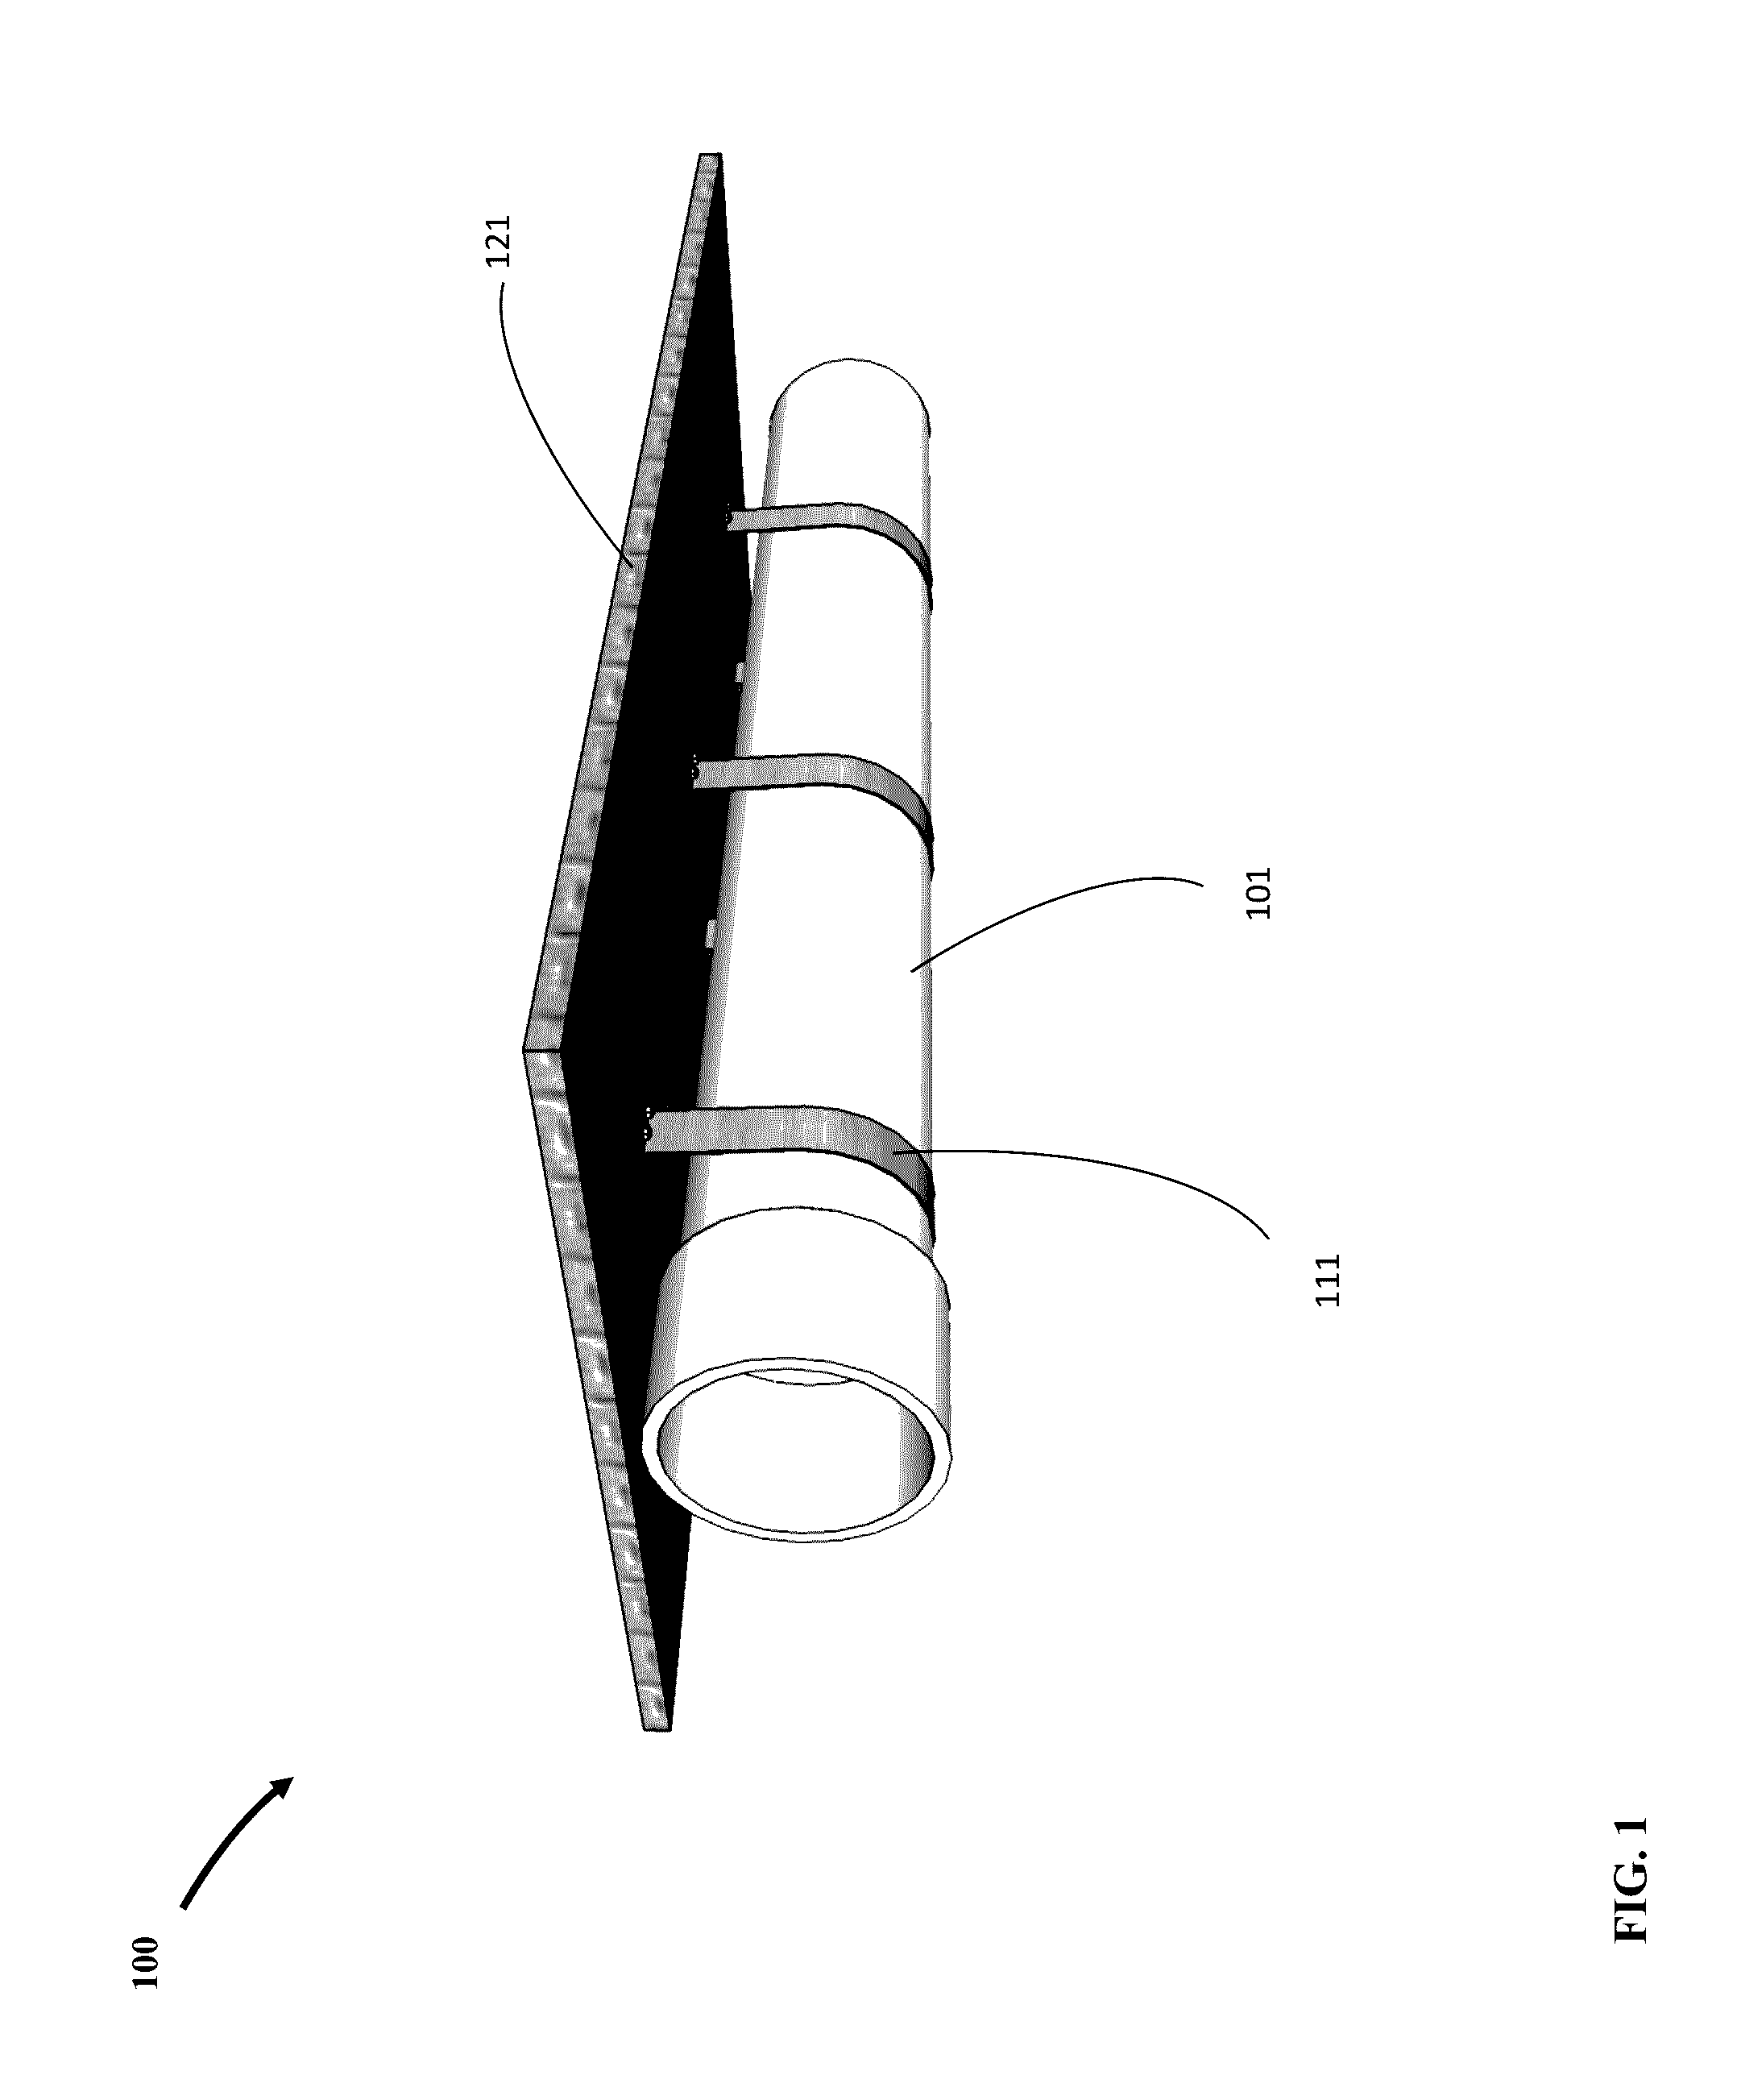 Apparatus and Method for Installing Utility Service Lines in Road Pavements